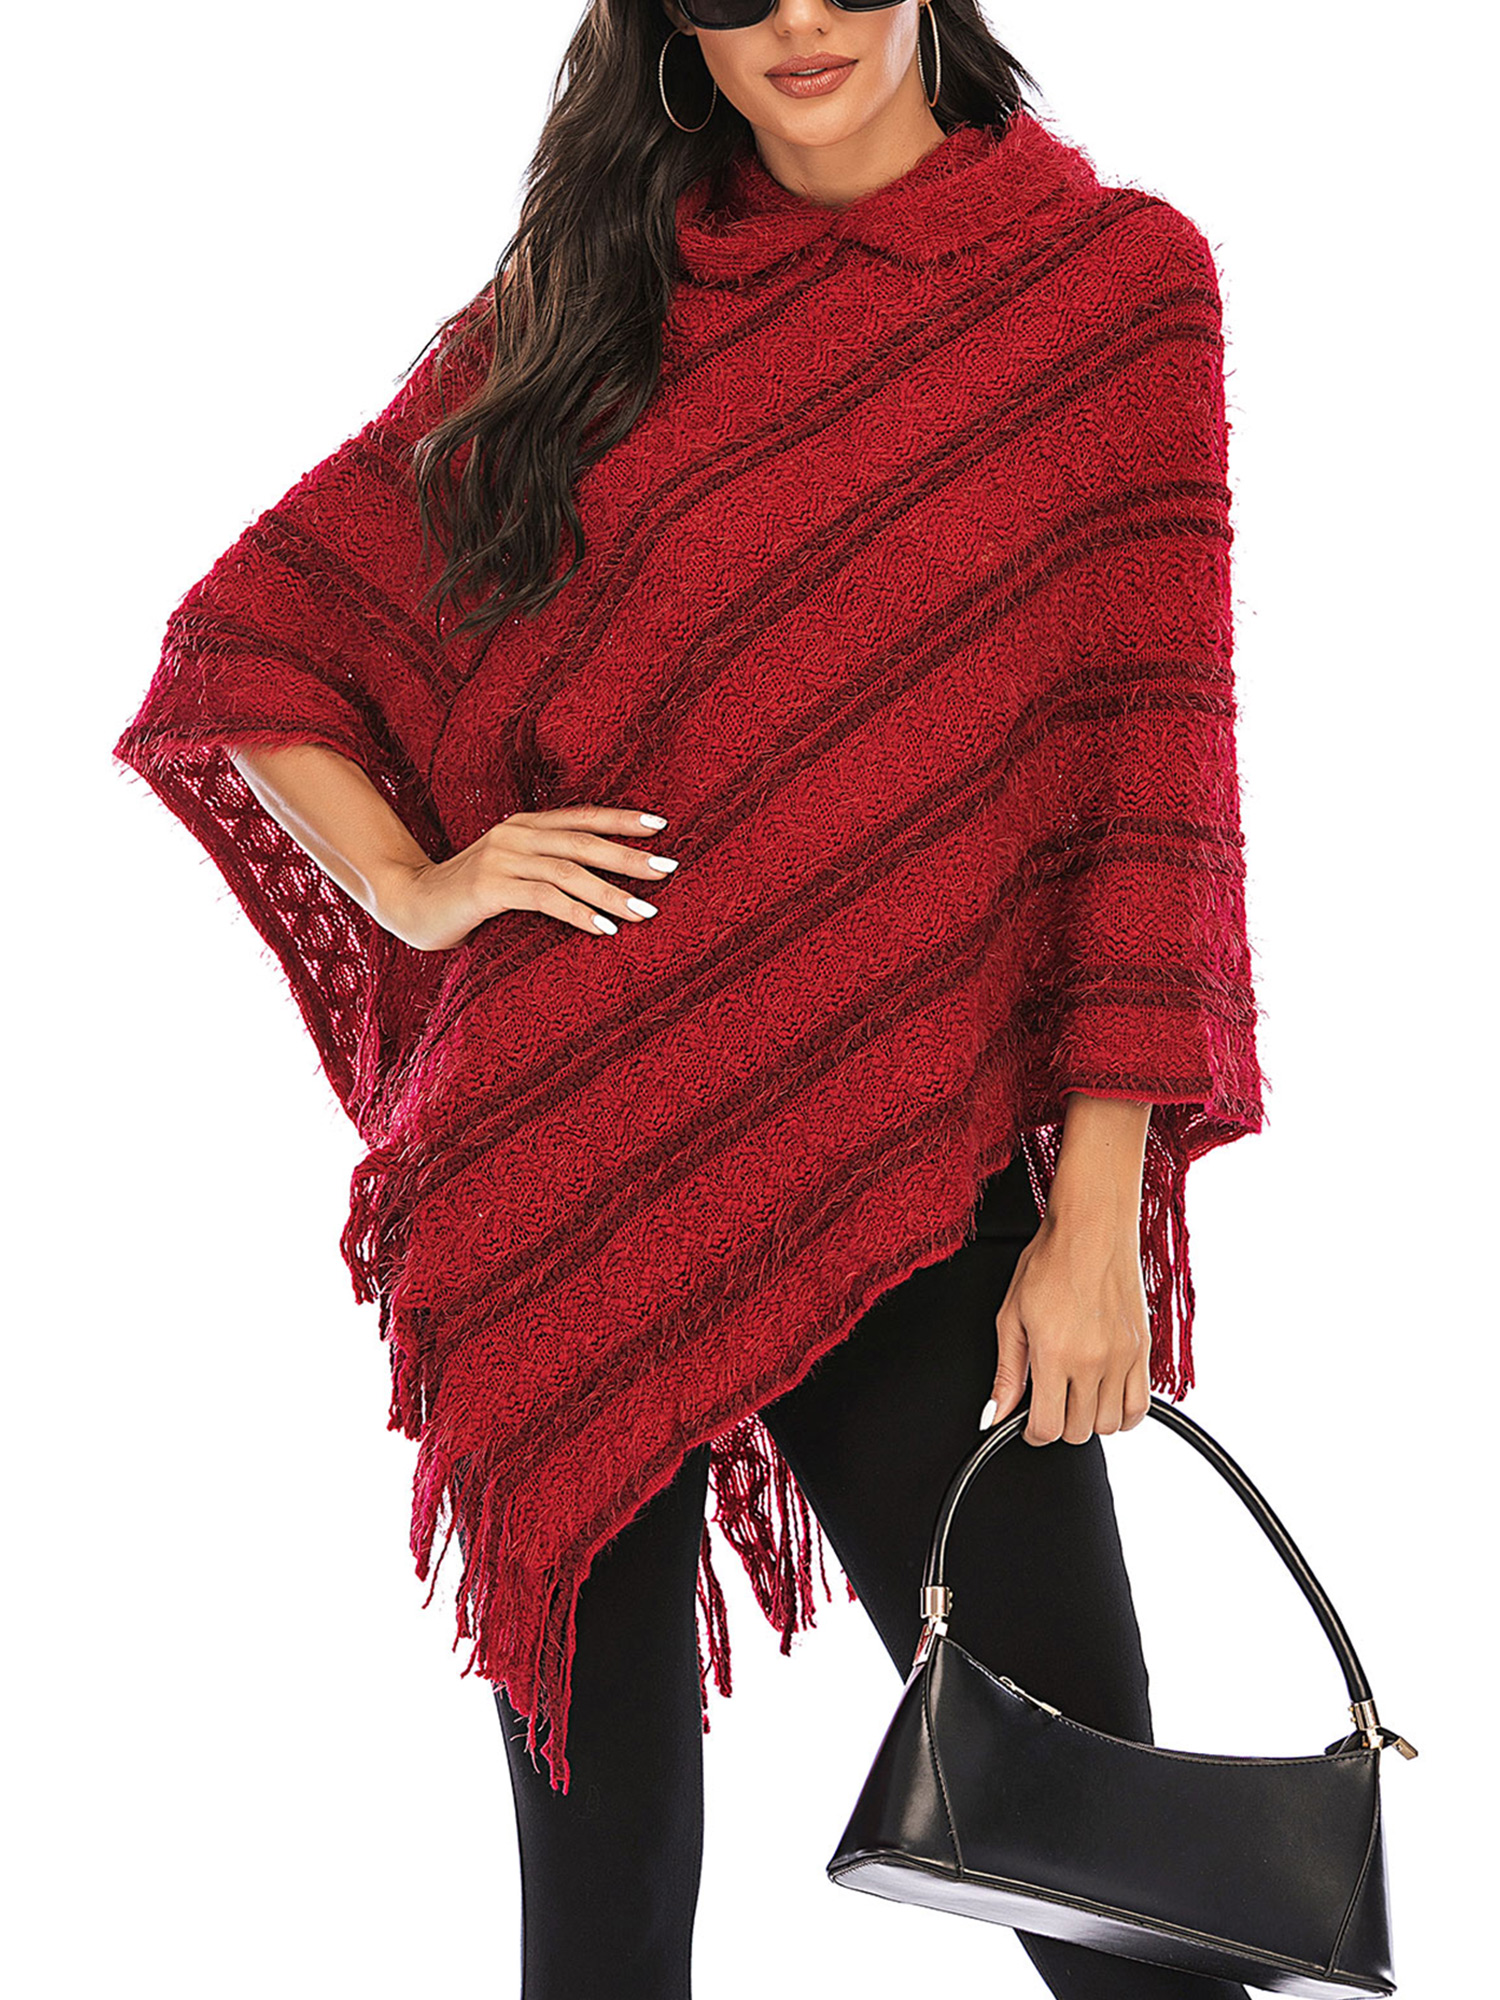 Knitted adult poncho,one size,Asymmetric Adult Poncho